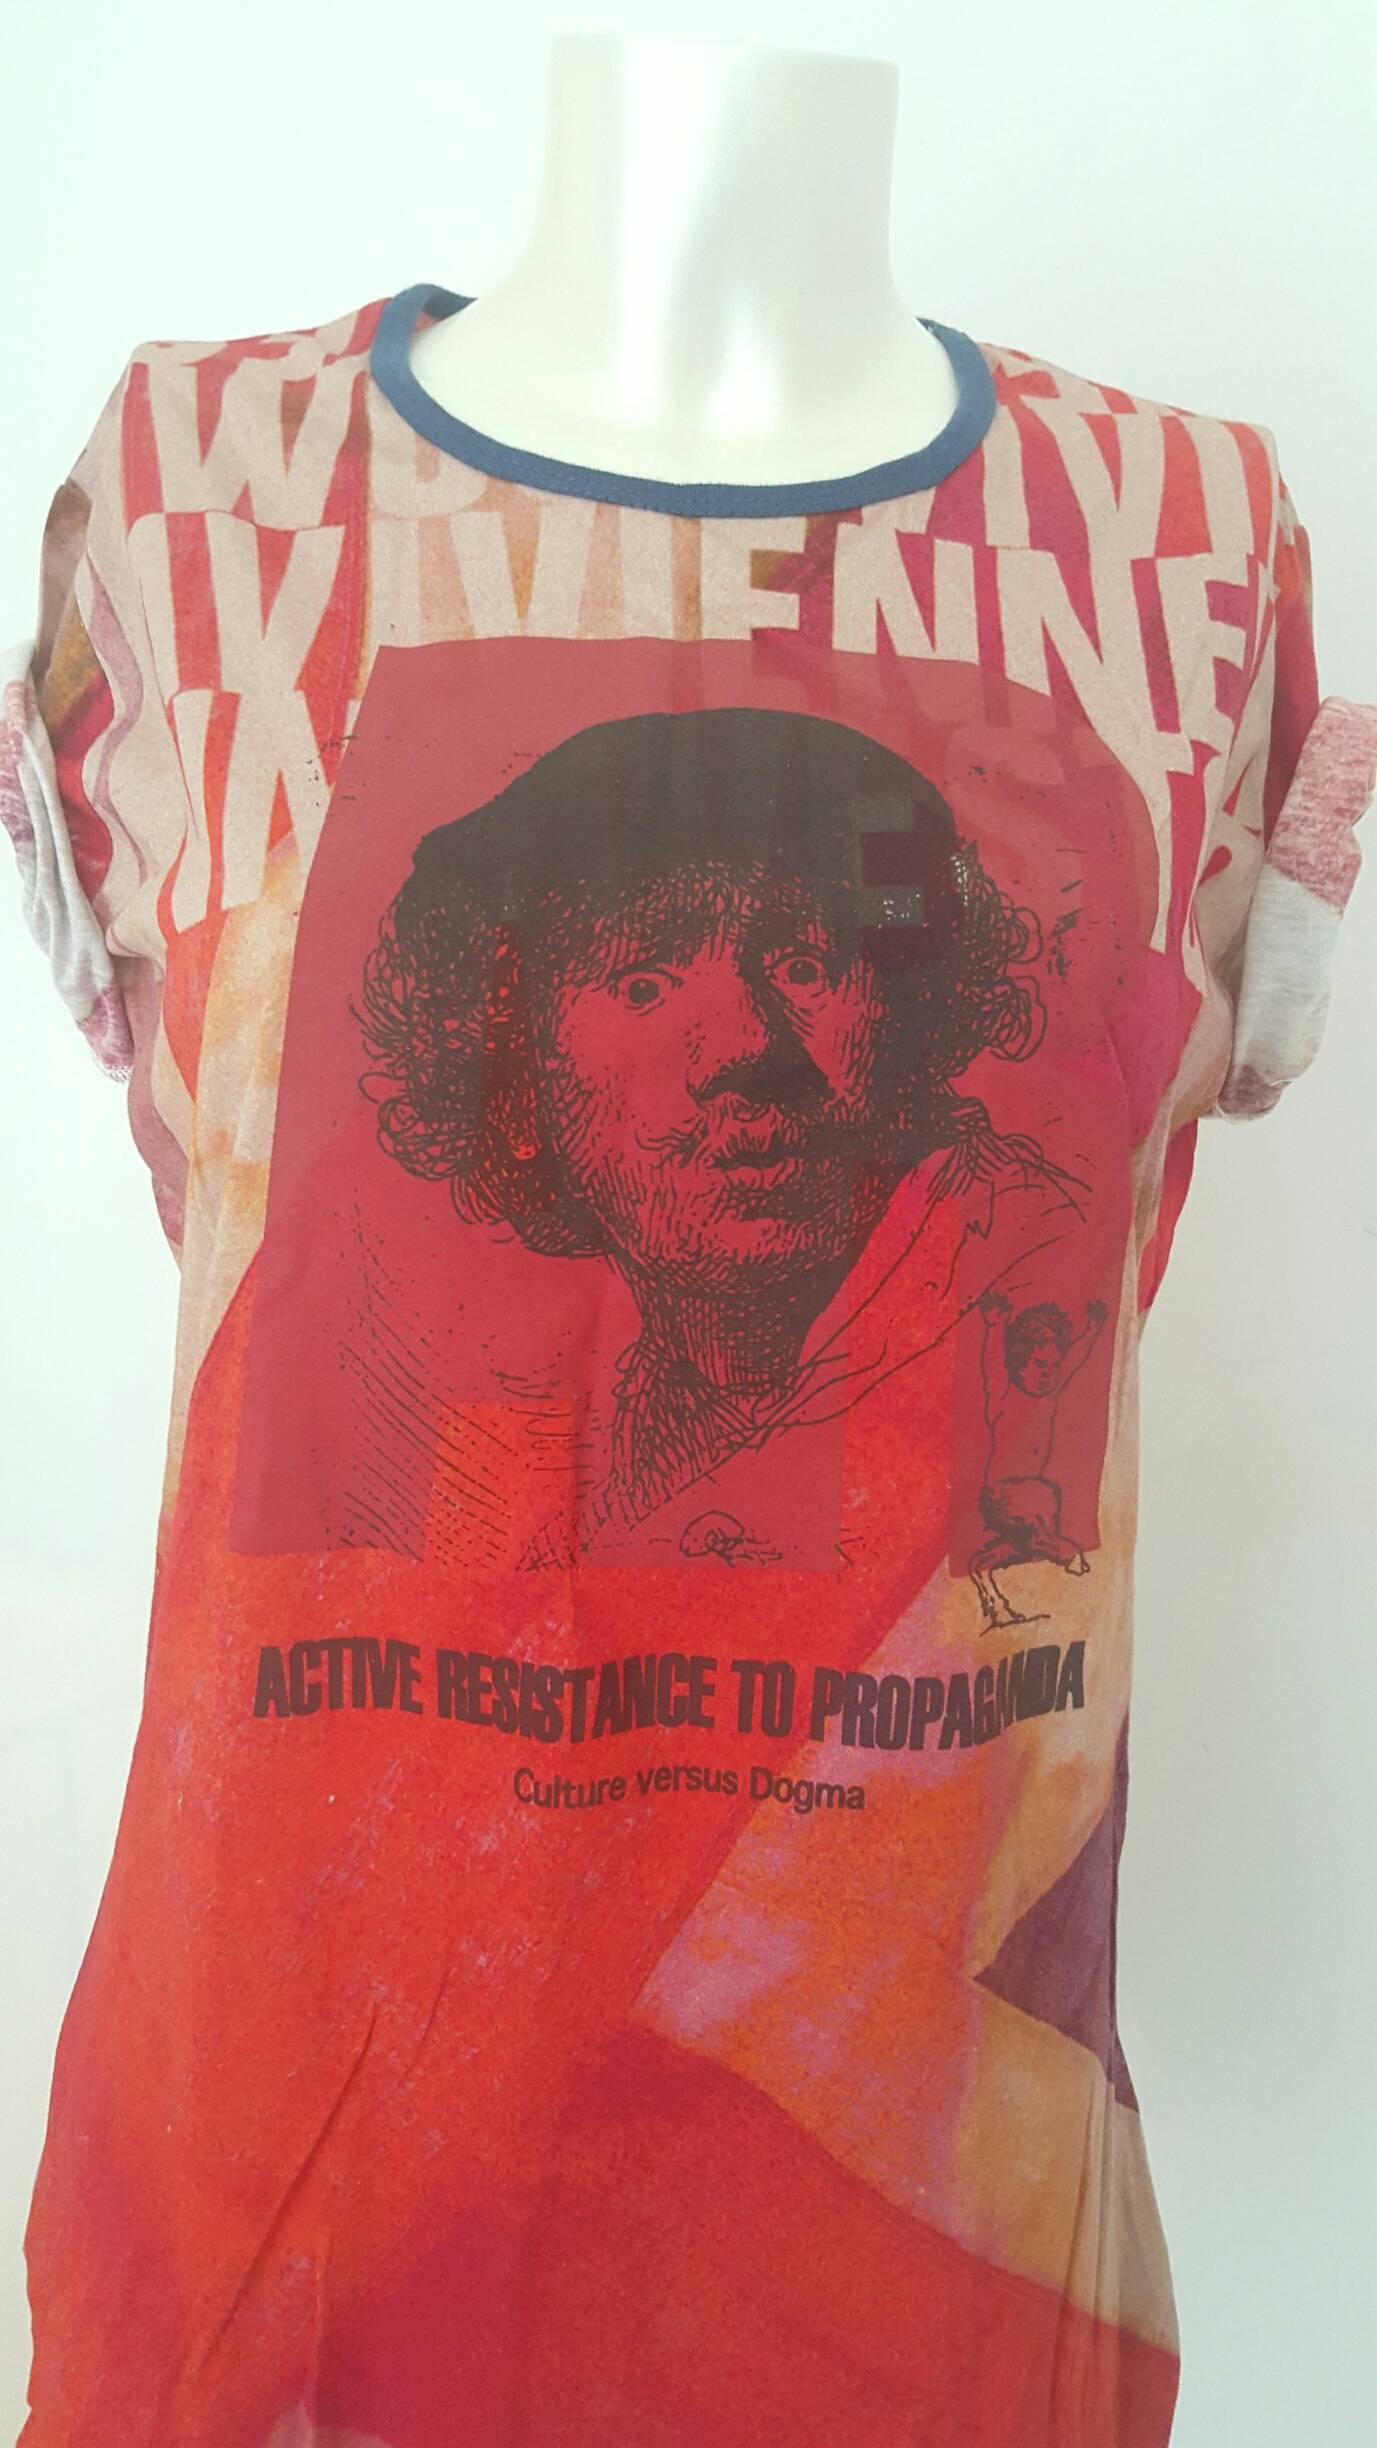 1990s Vivienne Westwood red shirt
active resistance to propaganda culture versus dogma
iconic unisex shirt